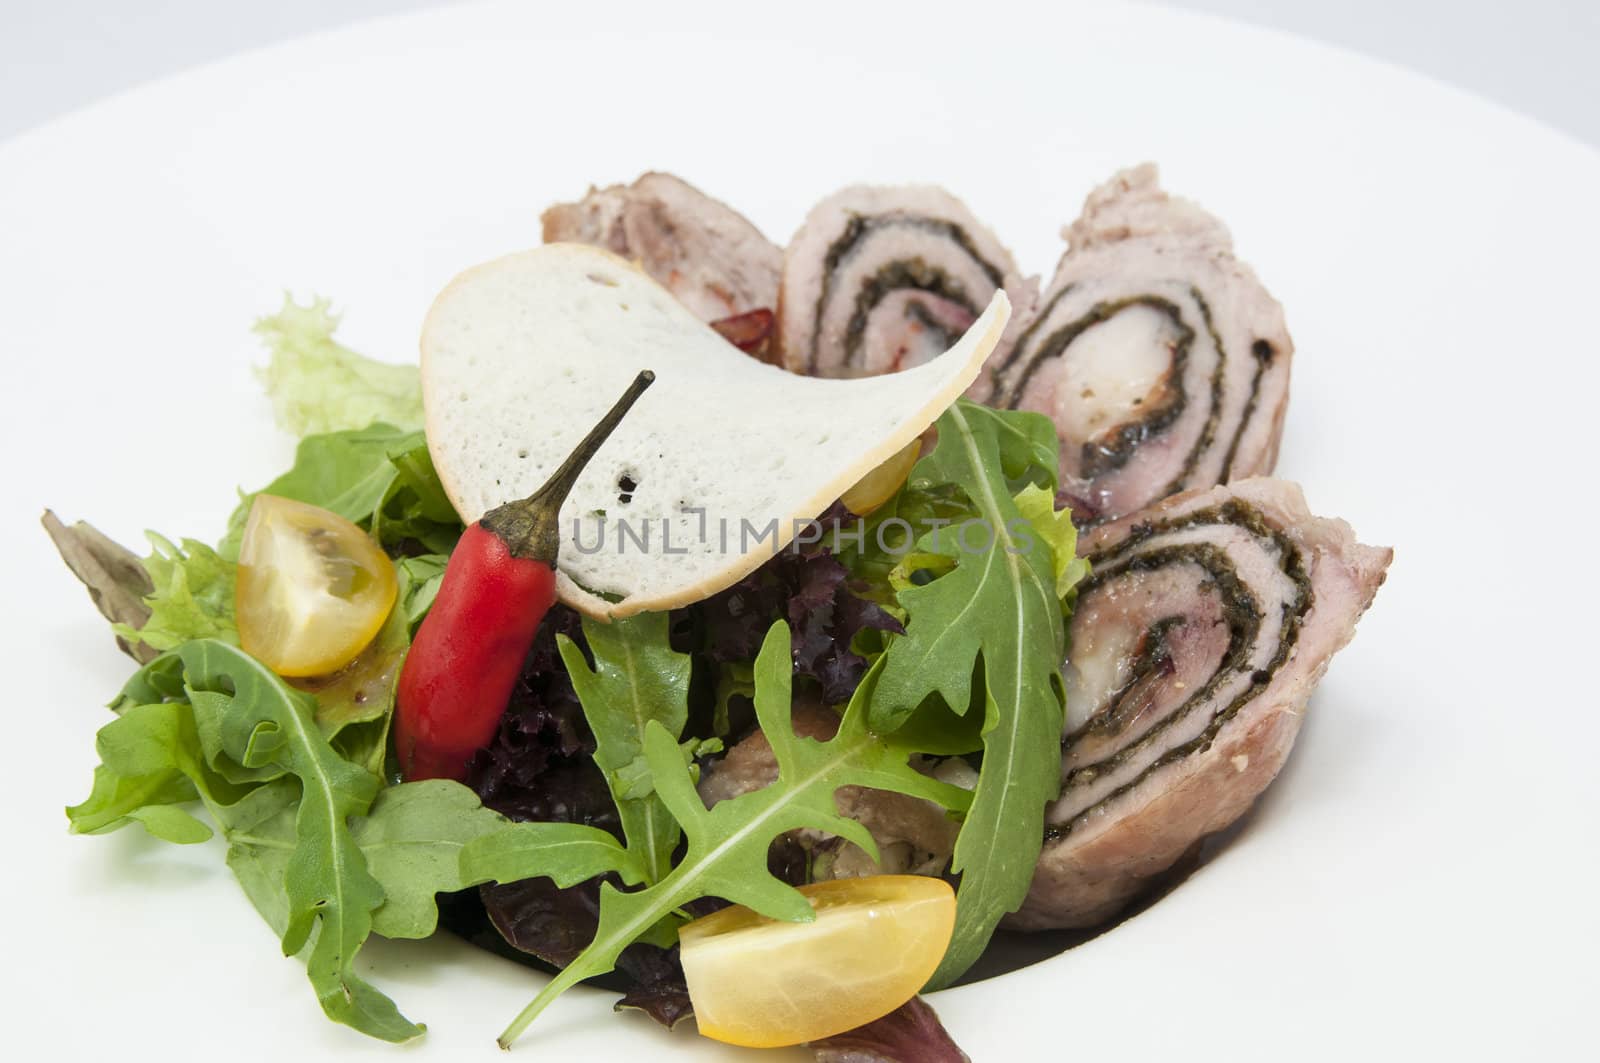 Roll meat with herbs and vegetables on a white plate